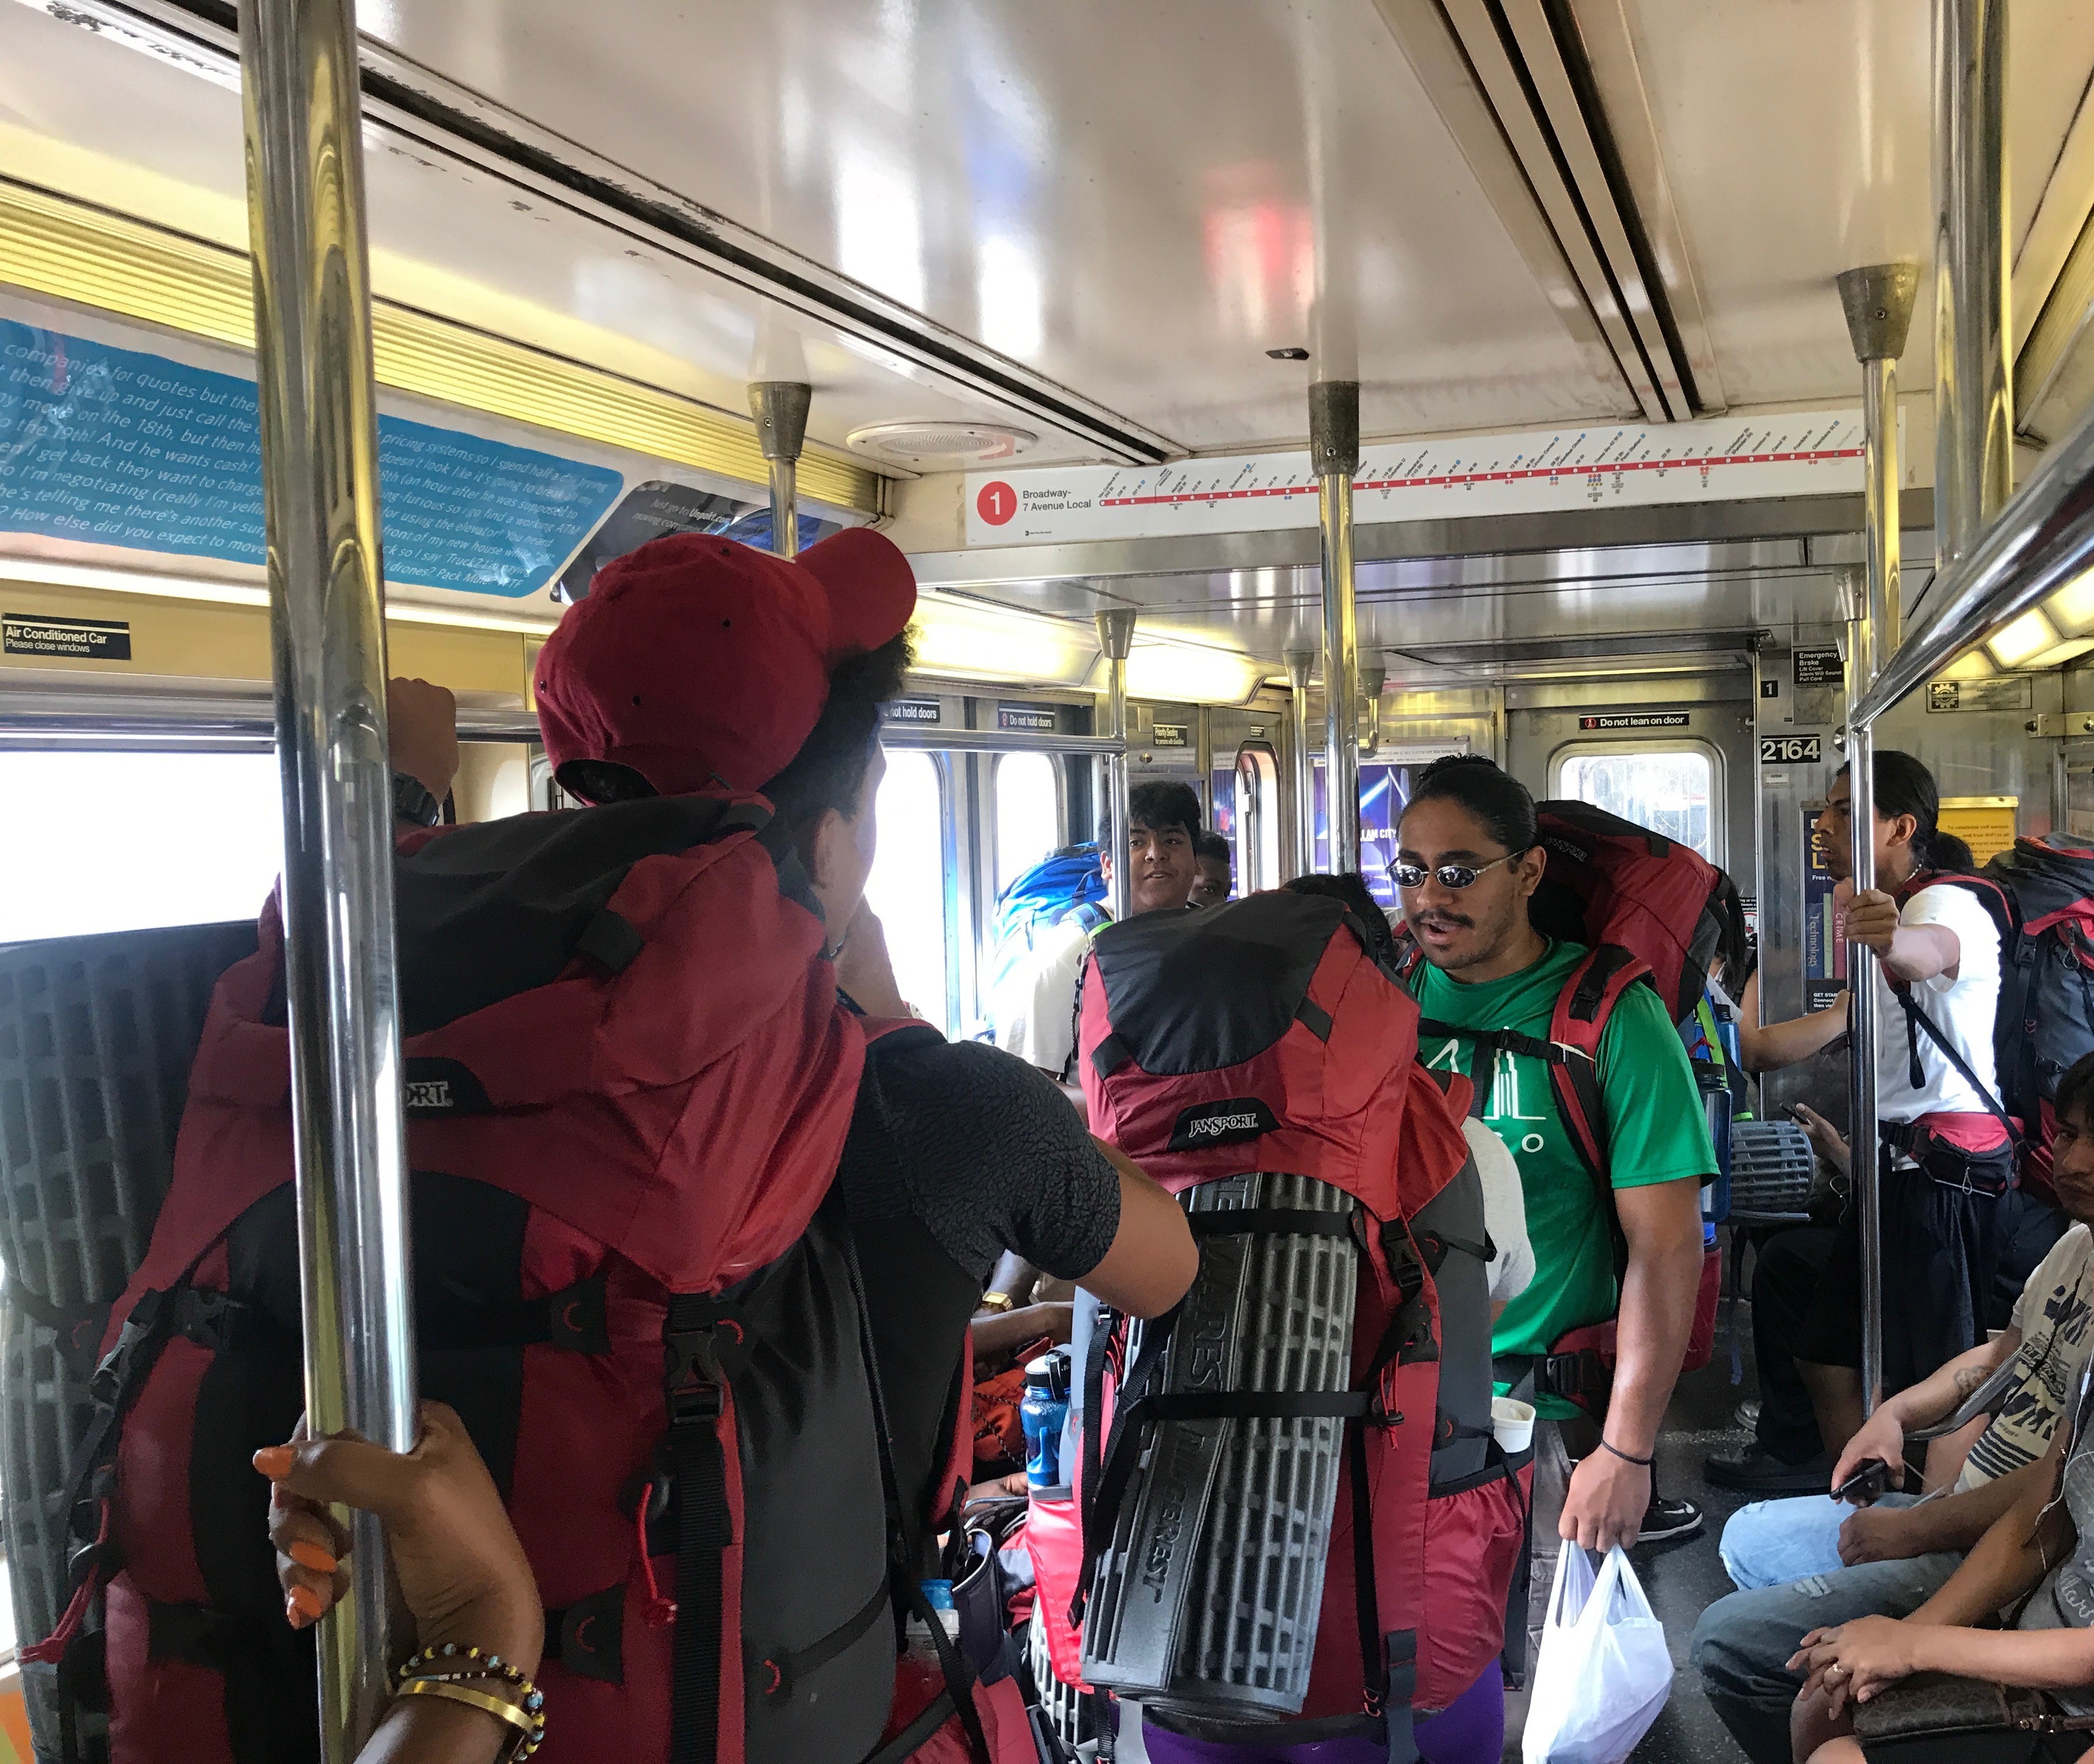 NYC ICO participants ride the train to get from place to place on their urban backpacking trip. 